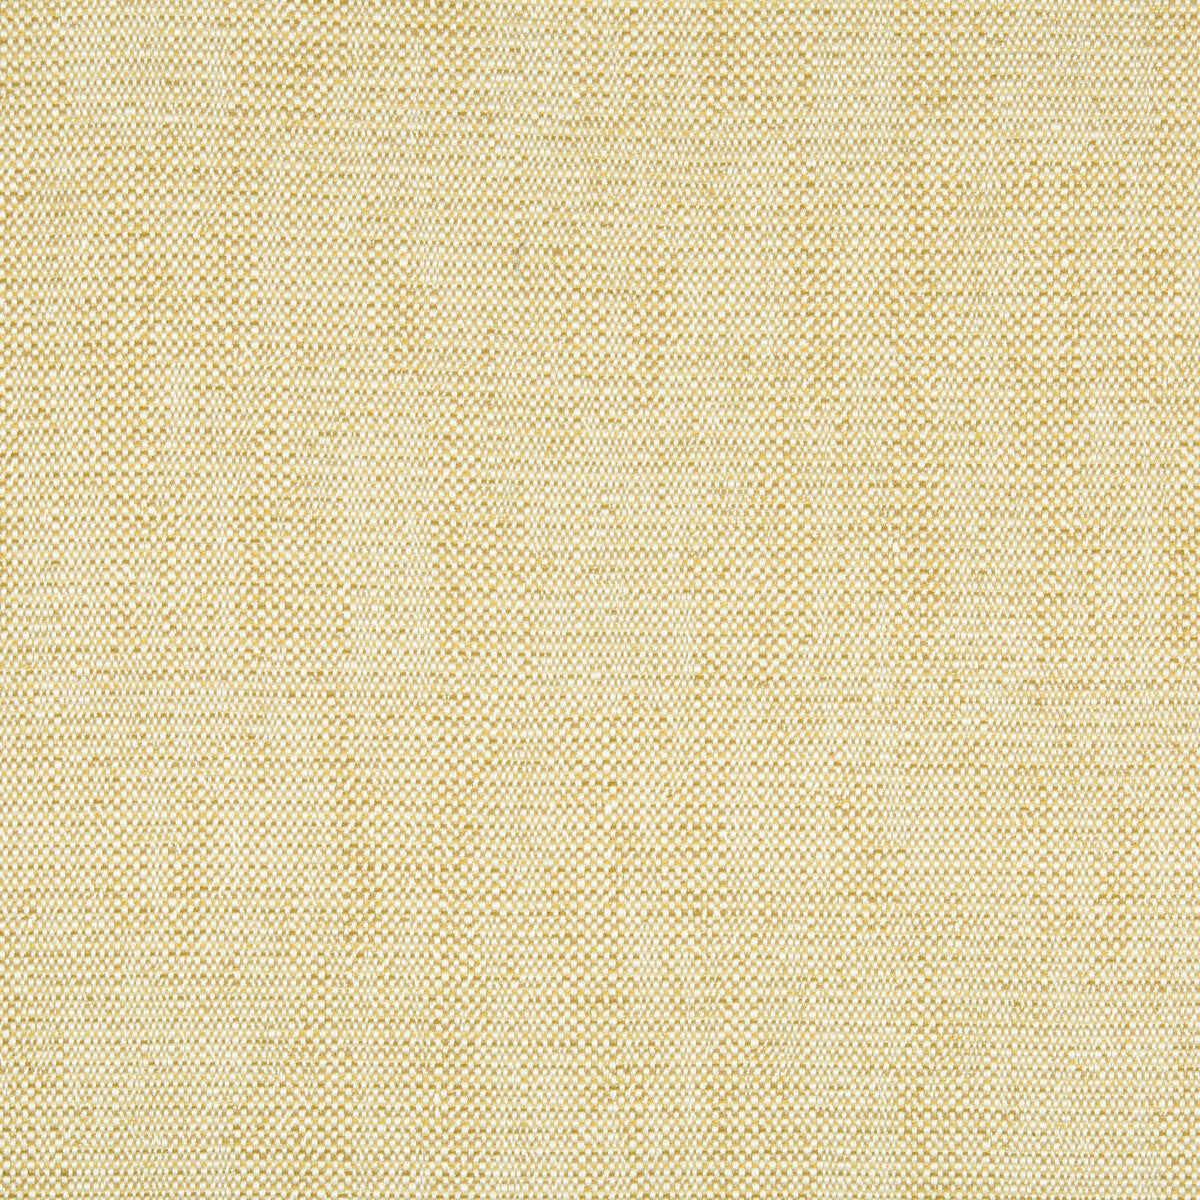 Kravet Contract fabric in 34768-416 color - pattern 34768.416.0 - by Kravet Contract in the Gis collection